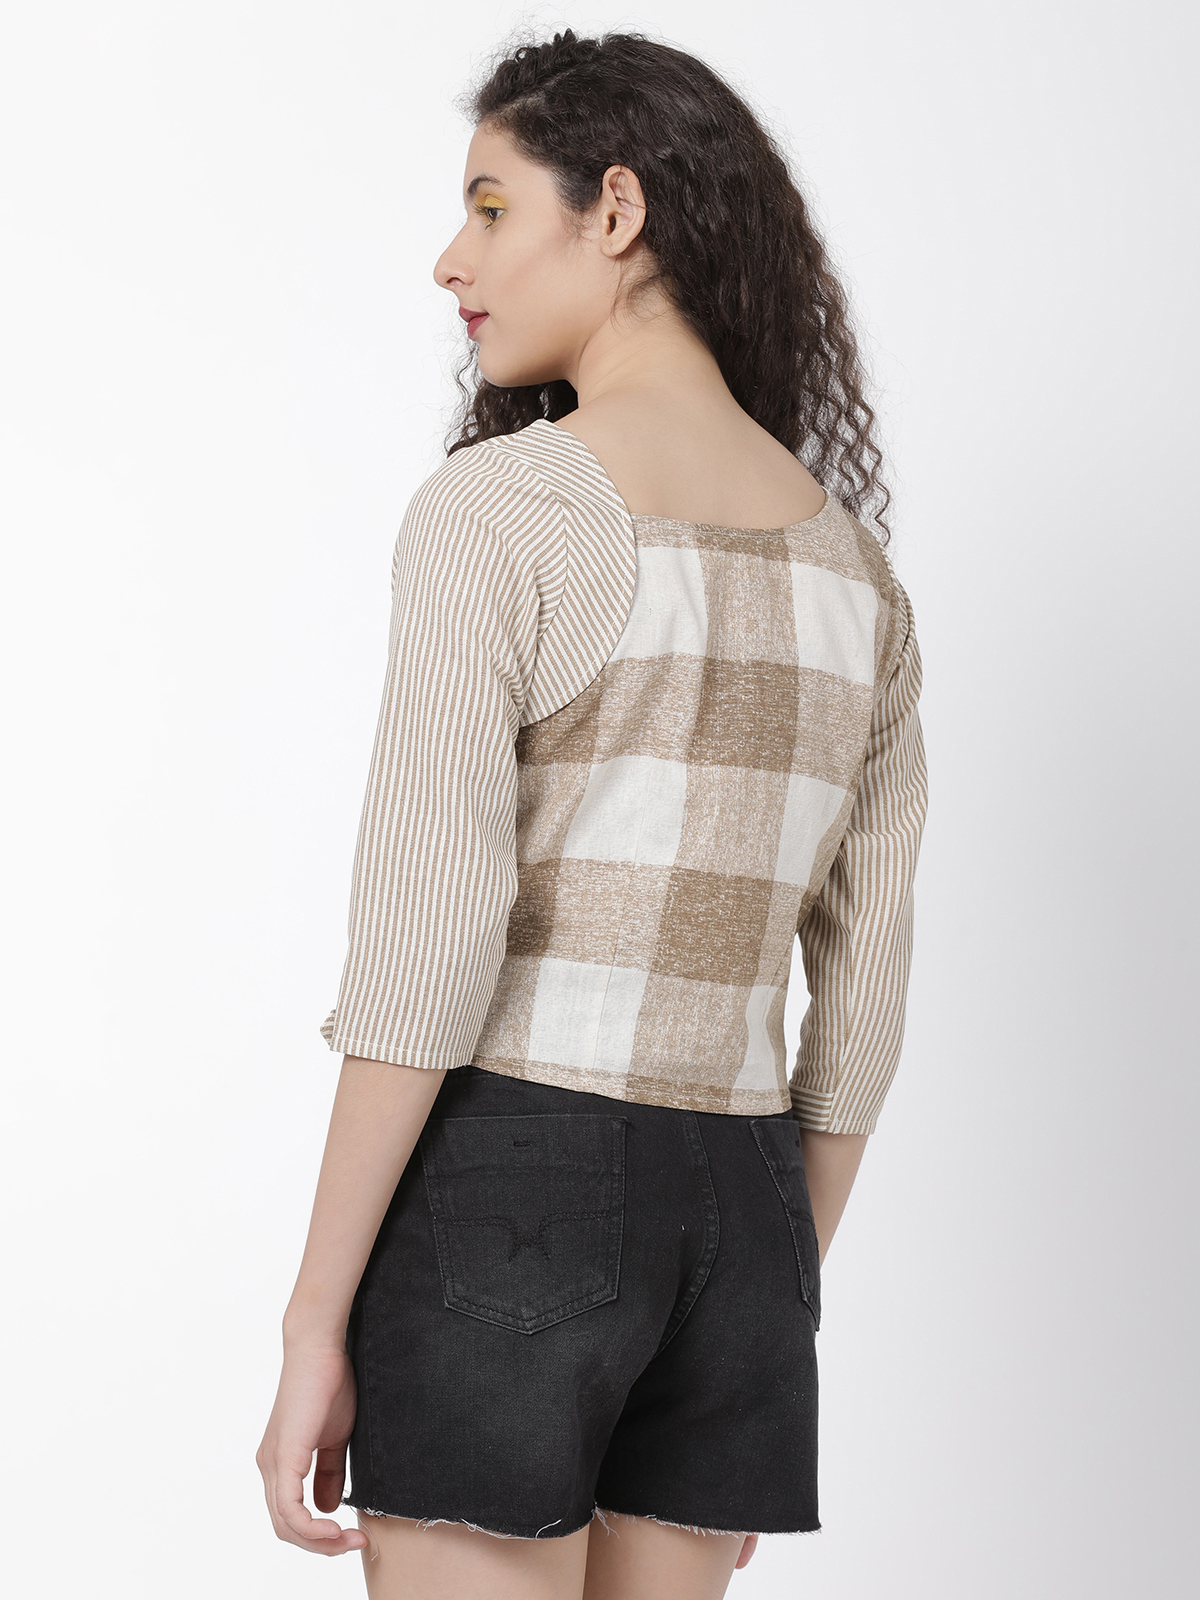  Exclusive Cotton Stylish Beige Stripped With Checkered Printed Top